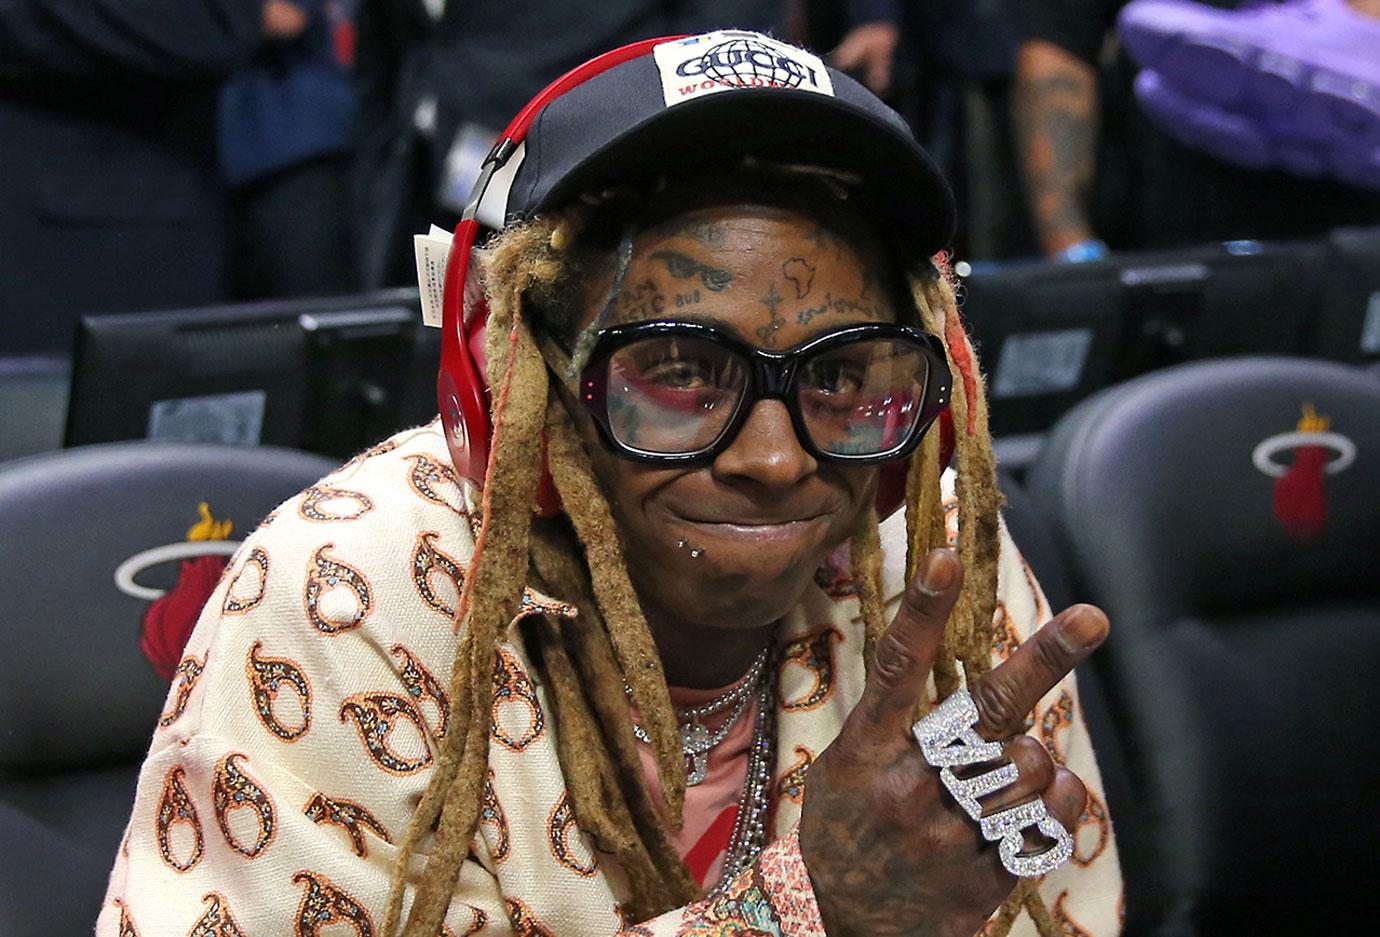 Lil Wayne Celebs With Multiple Baby Mamas: Offset, Mick Jagger And More